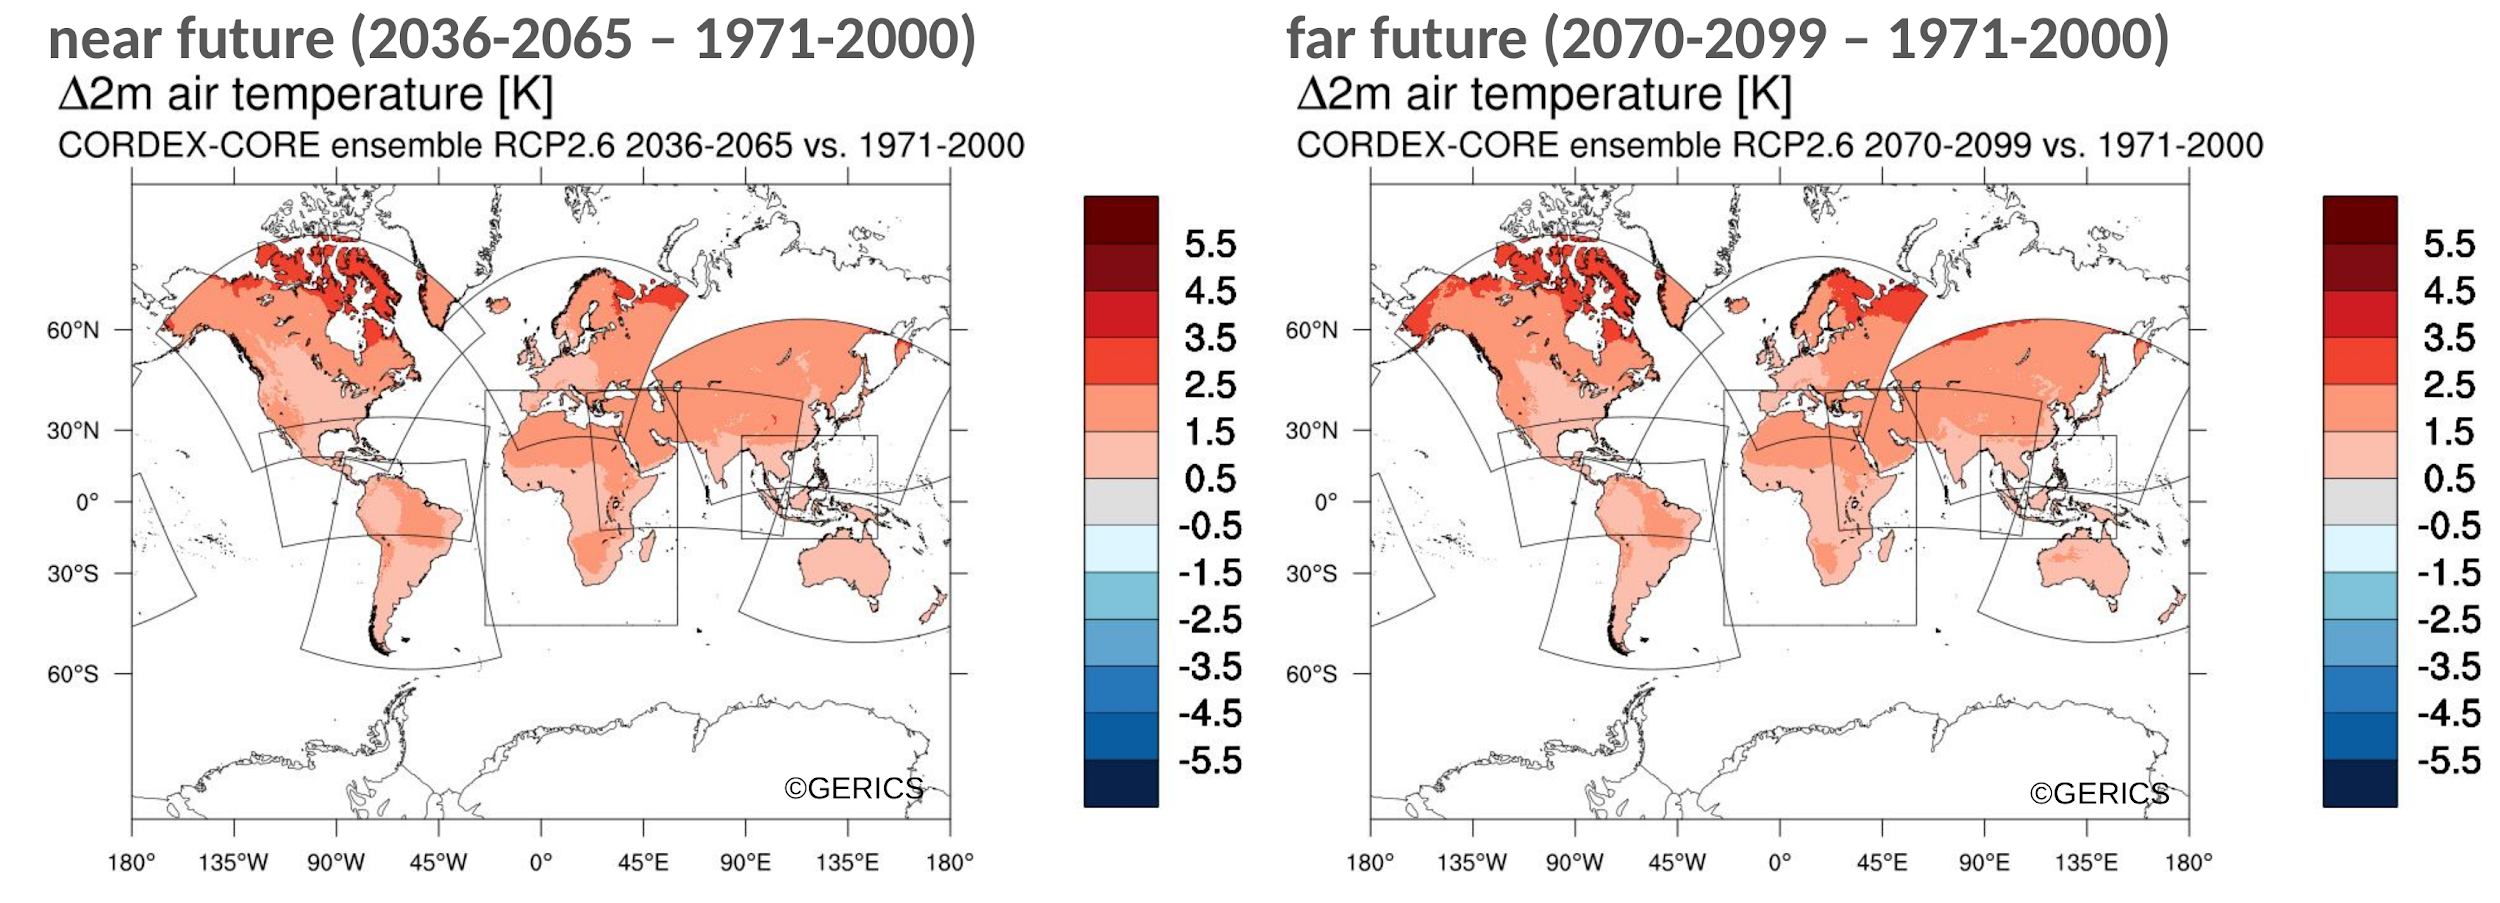 Mean annual temperature climate change signal at RCP2.6